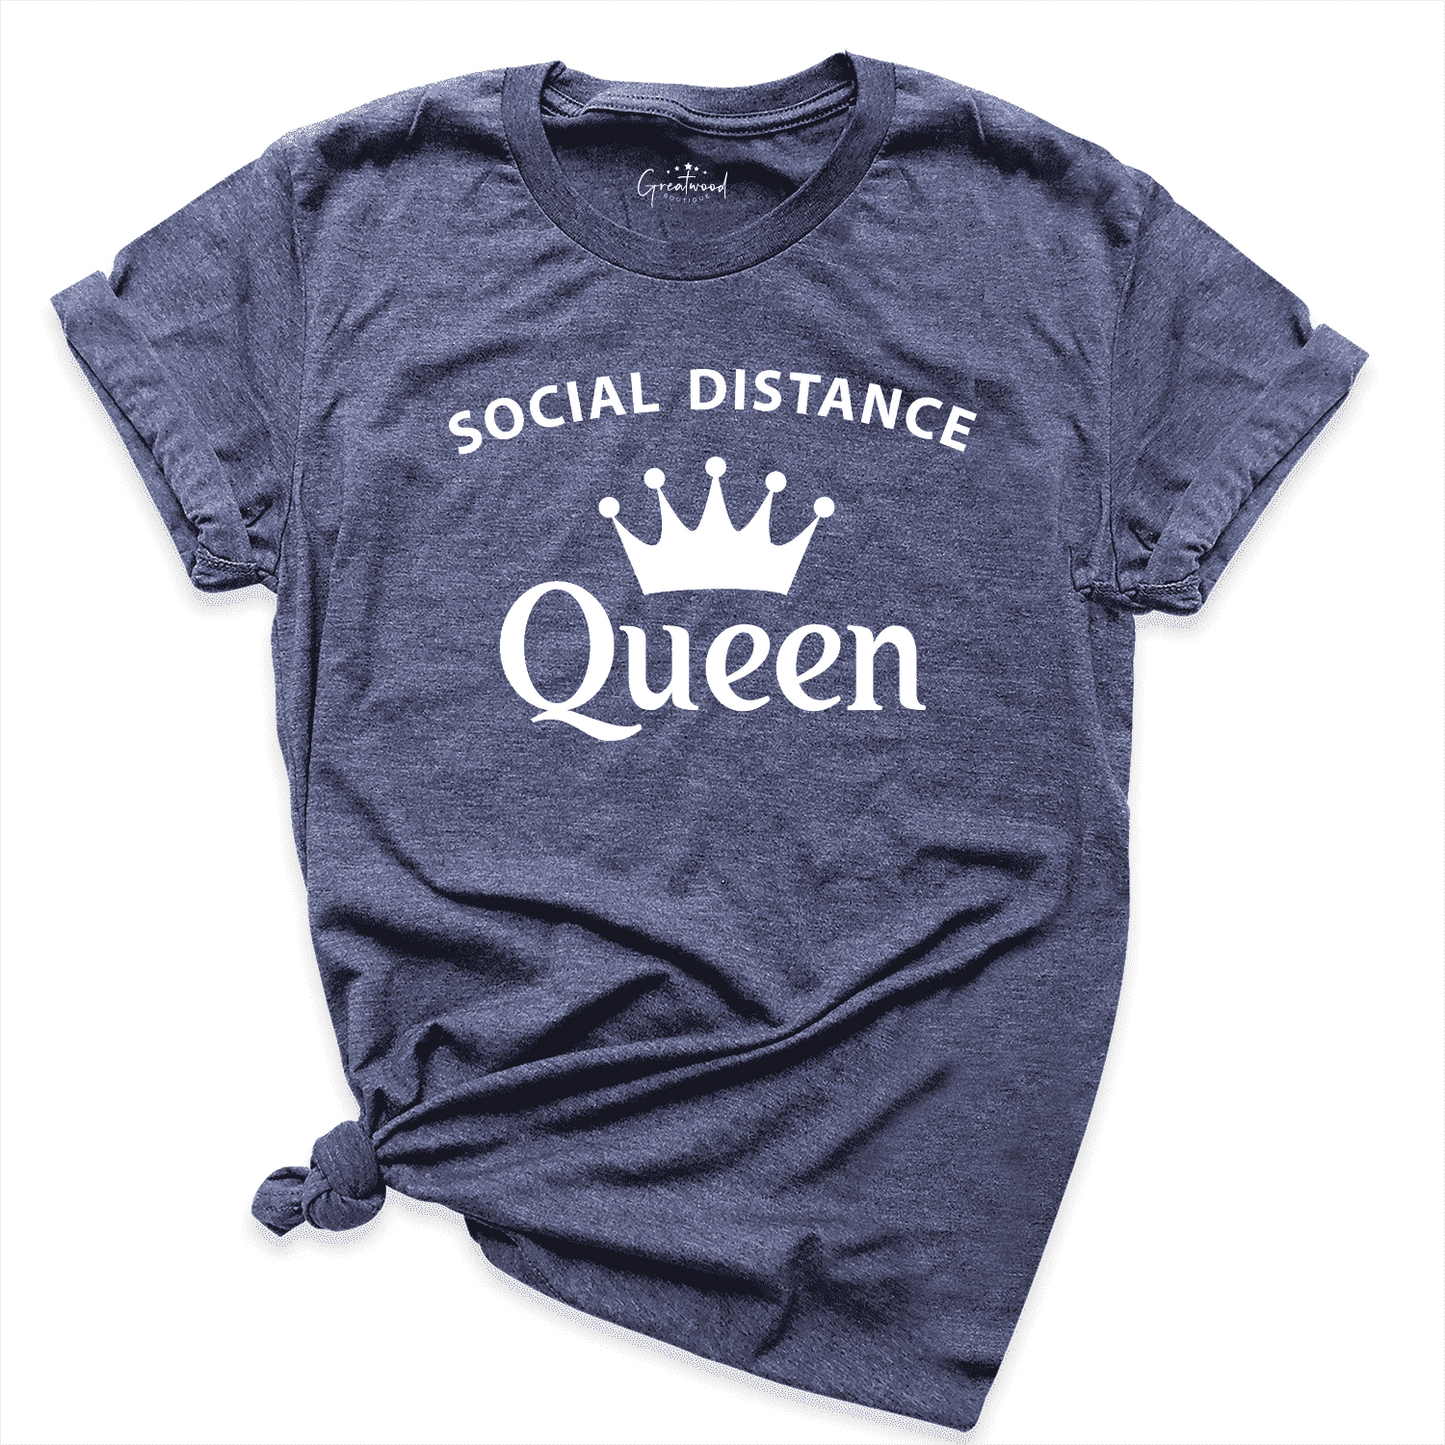 Social Distance Queen Shirt Navy - Greatwood Boutique